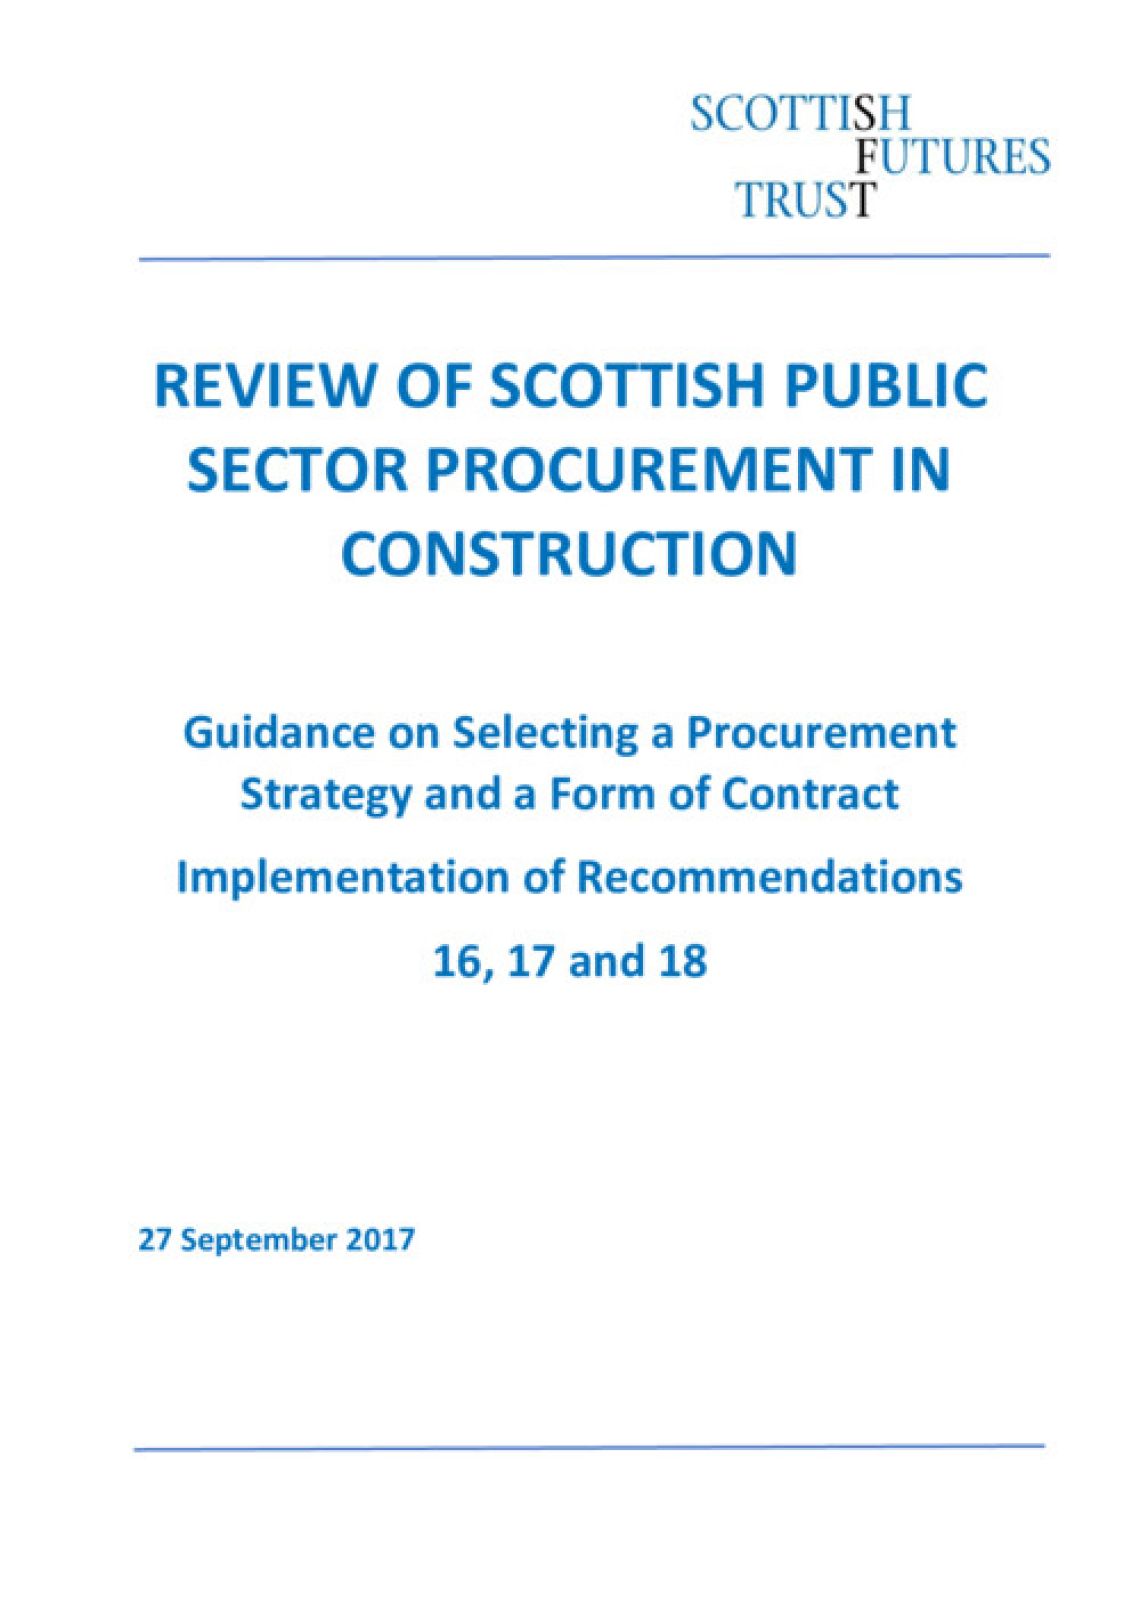 Guidance on Selecting a Procurement Strategy and a Form of Contract cover